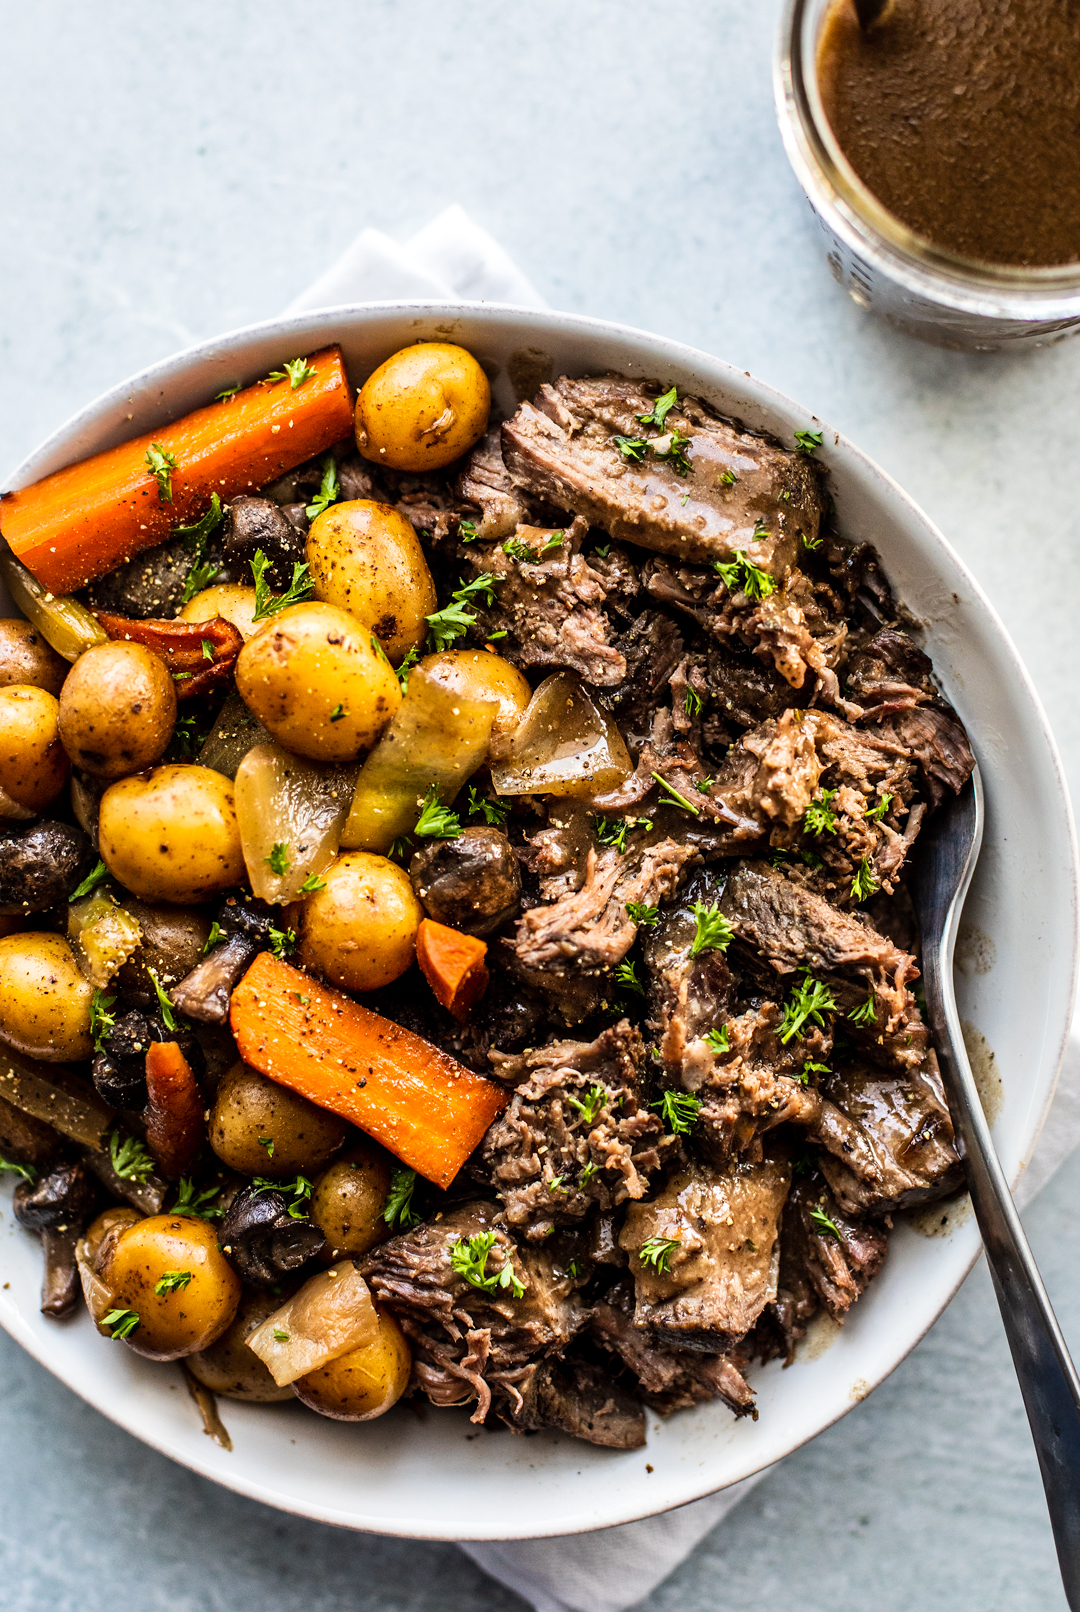 Overhead shot of shredded pot roast in serving dish with potatoes, carrots, and mushrooms.